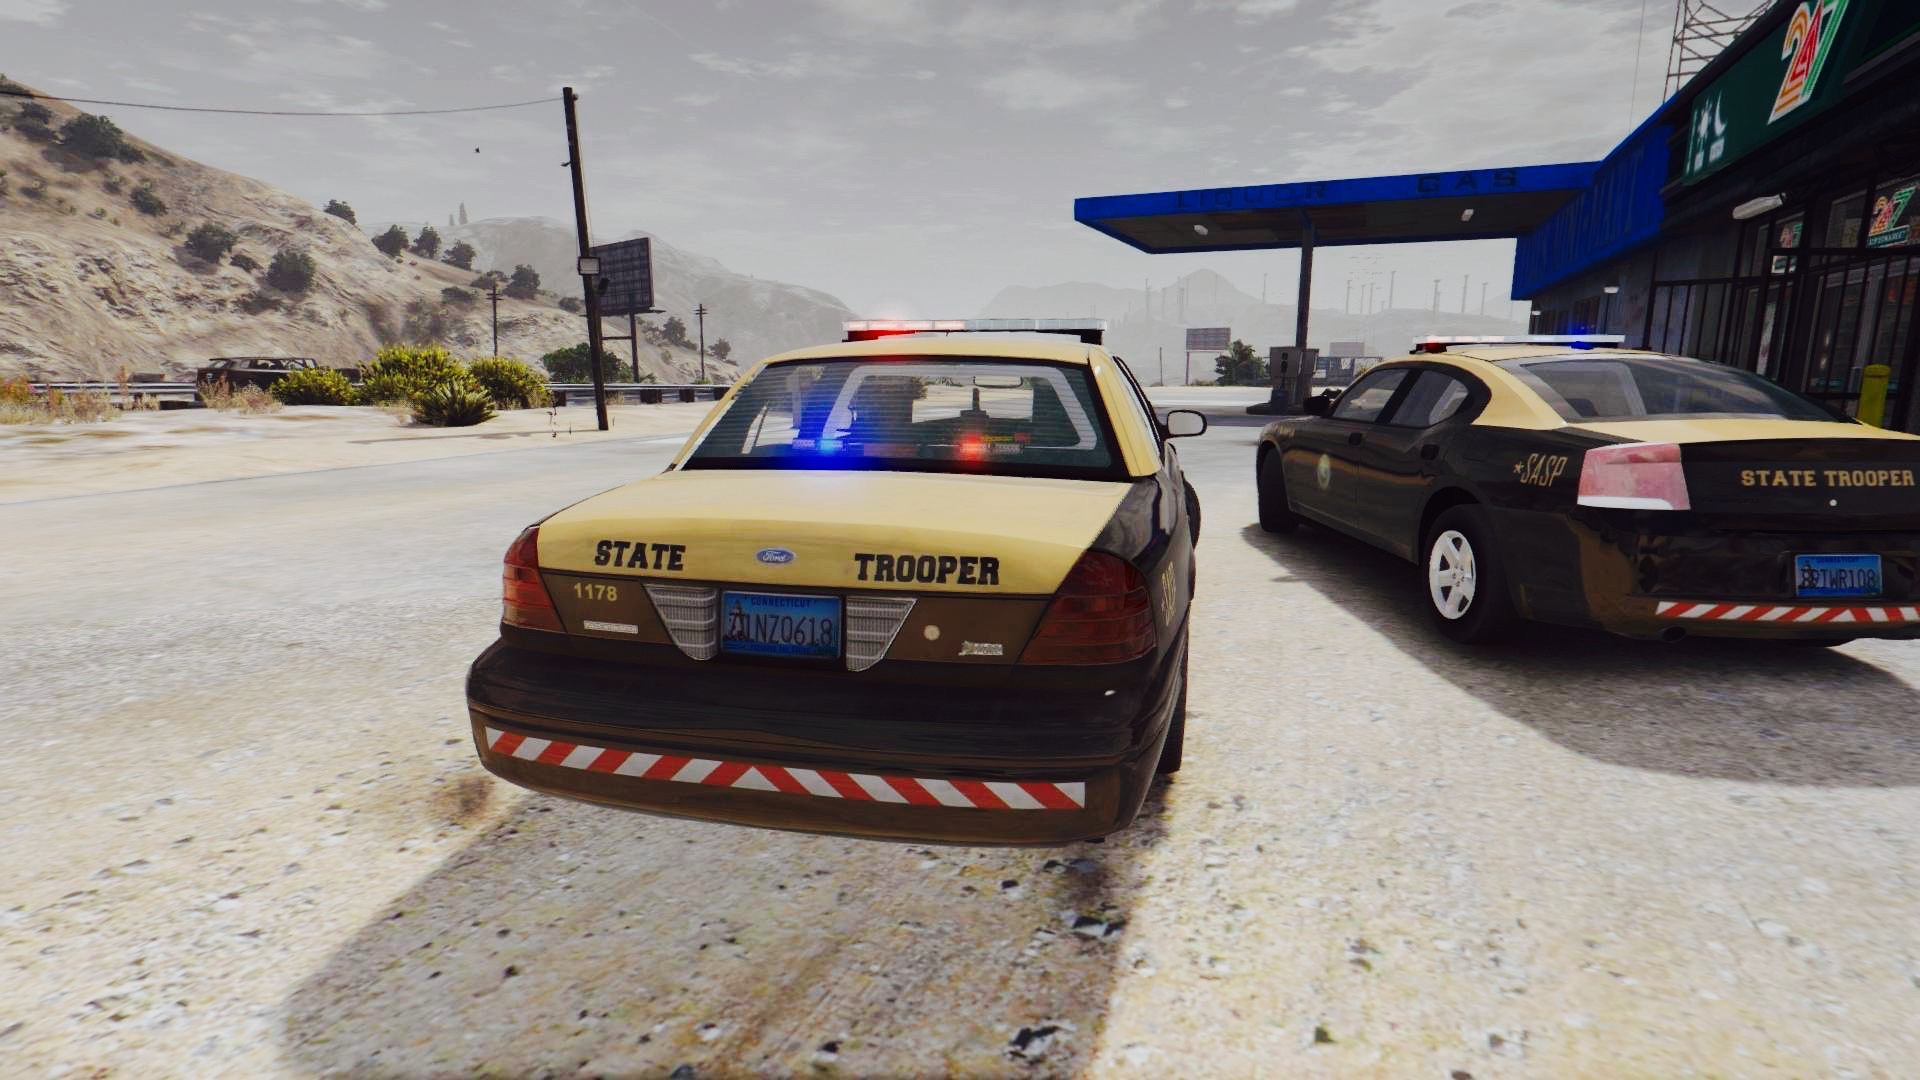 San Andreas State Police Pack All Blue Lights - Bank2home.com